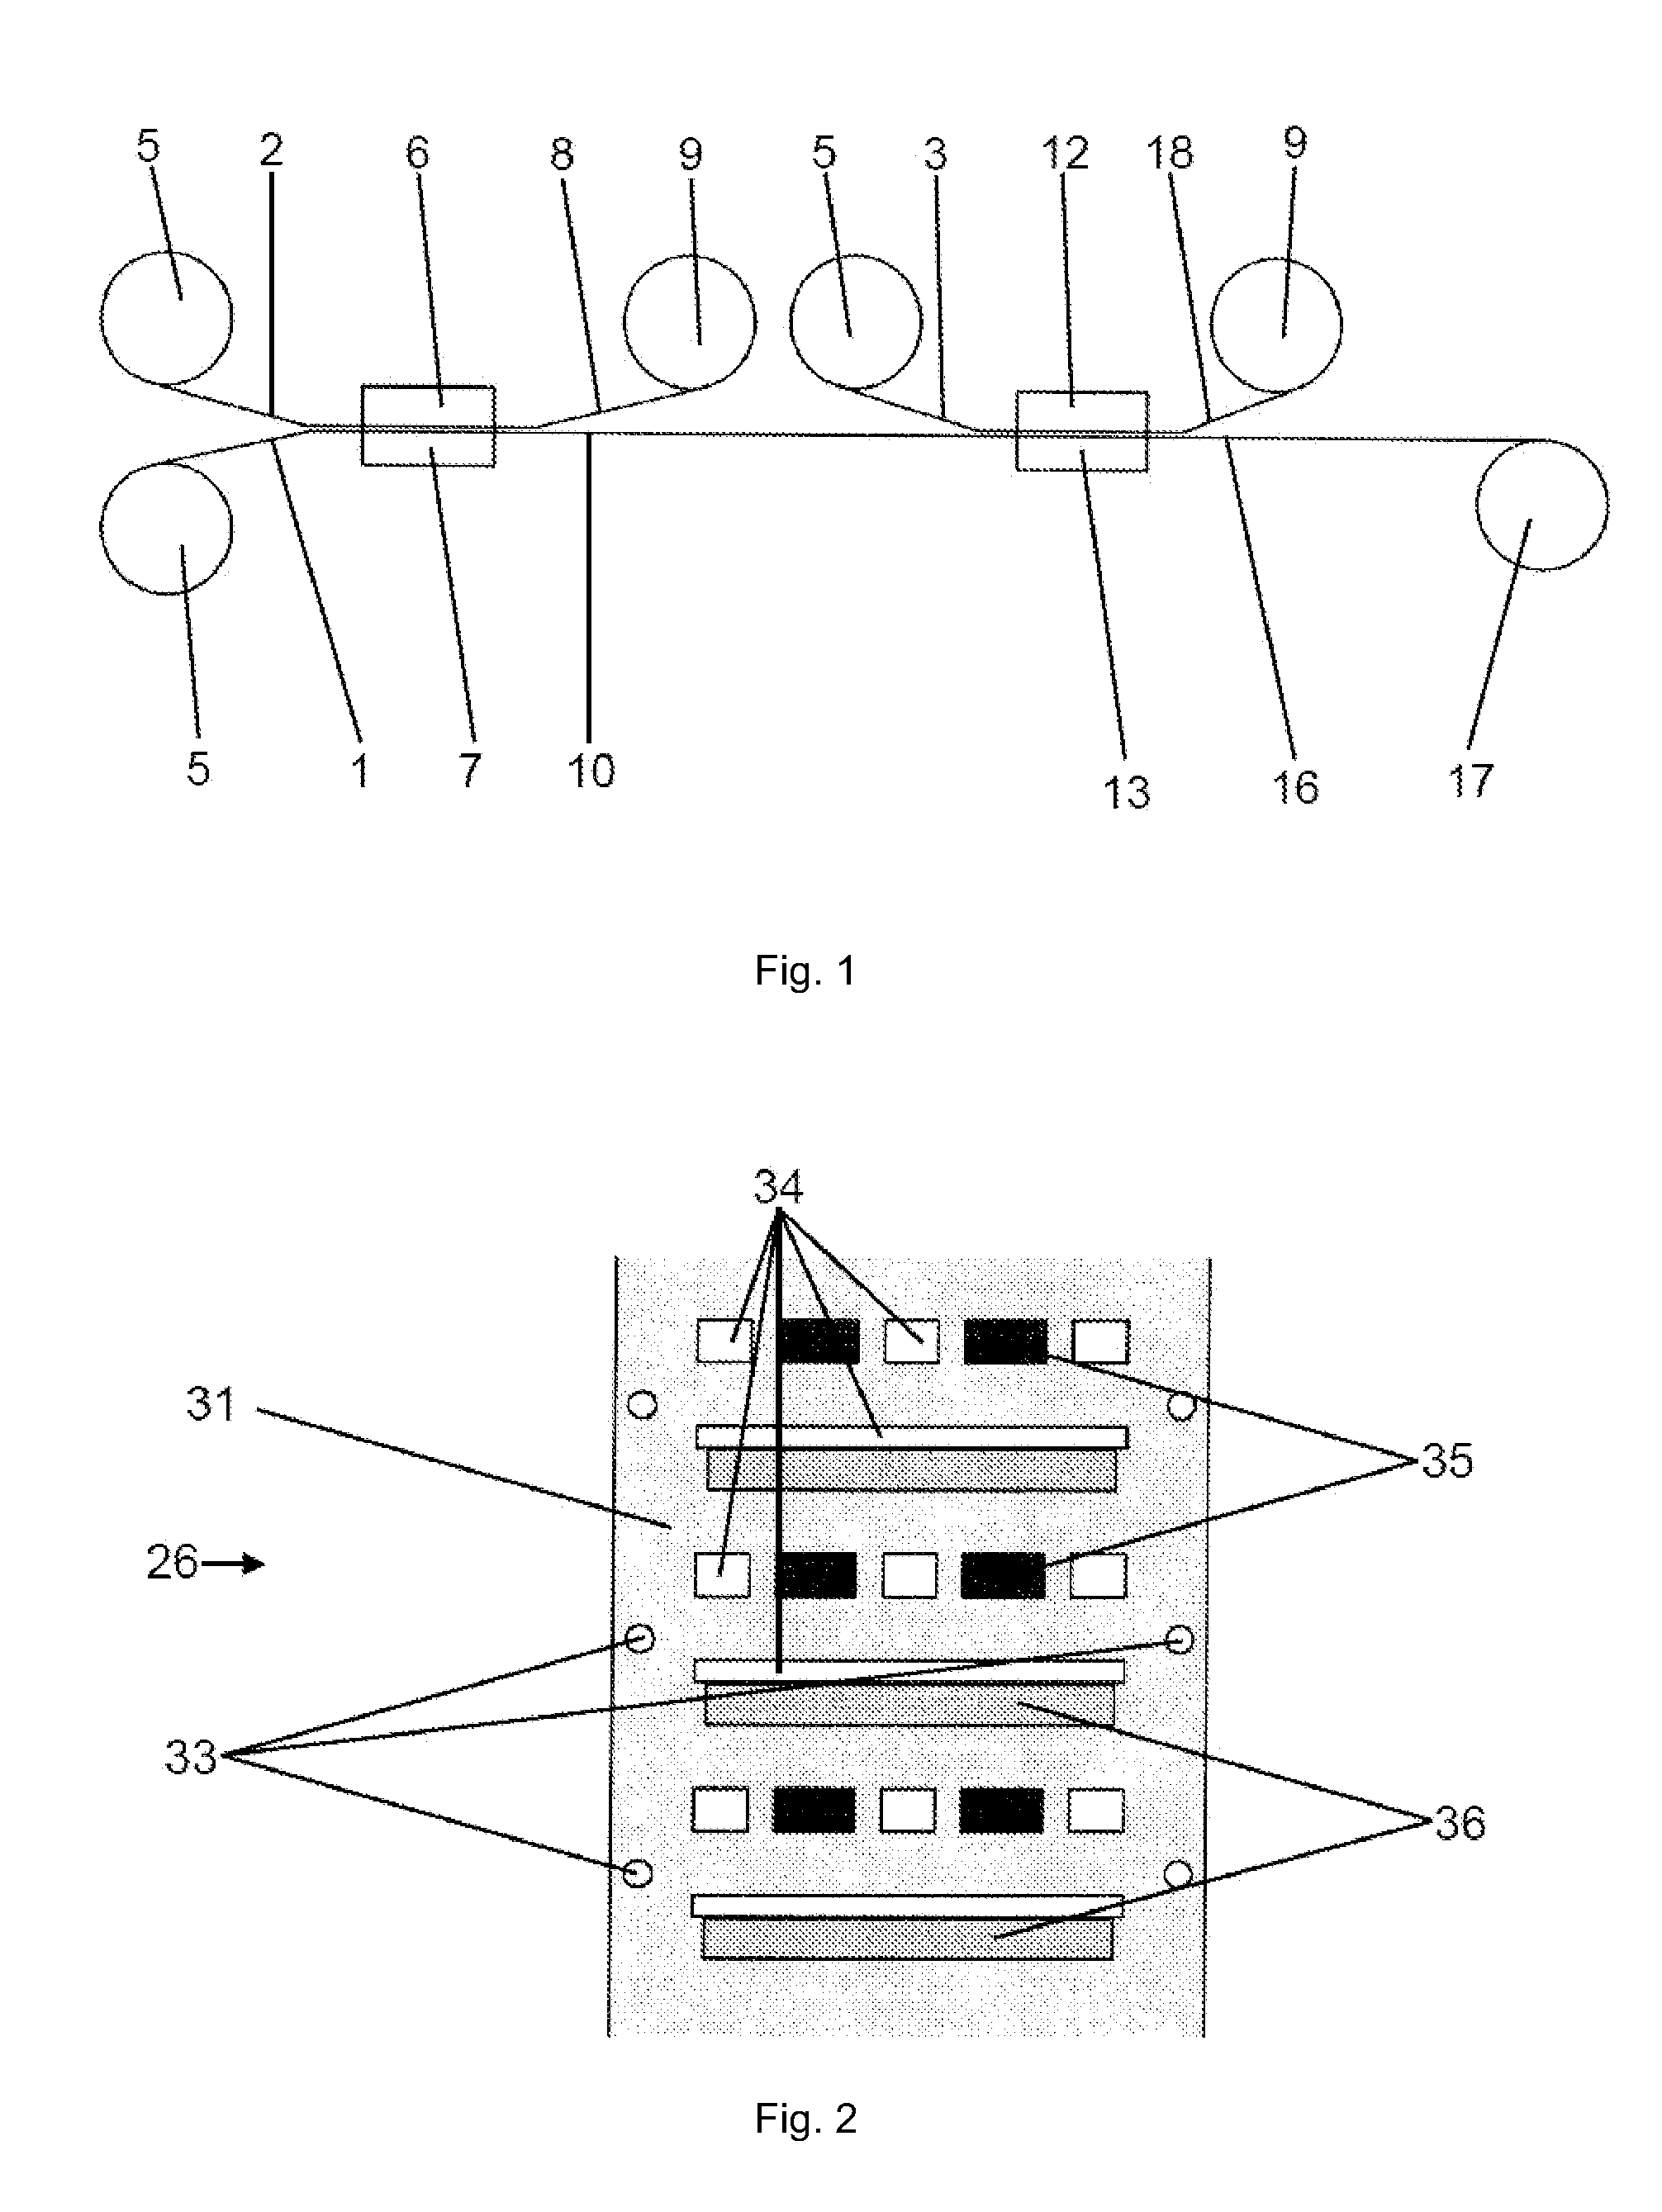 Method for partial lamination of flexible substrates